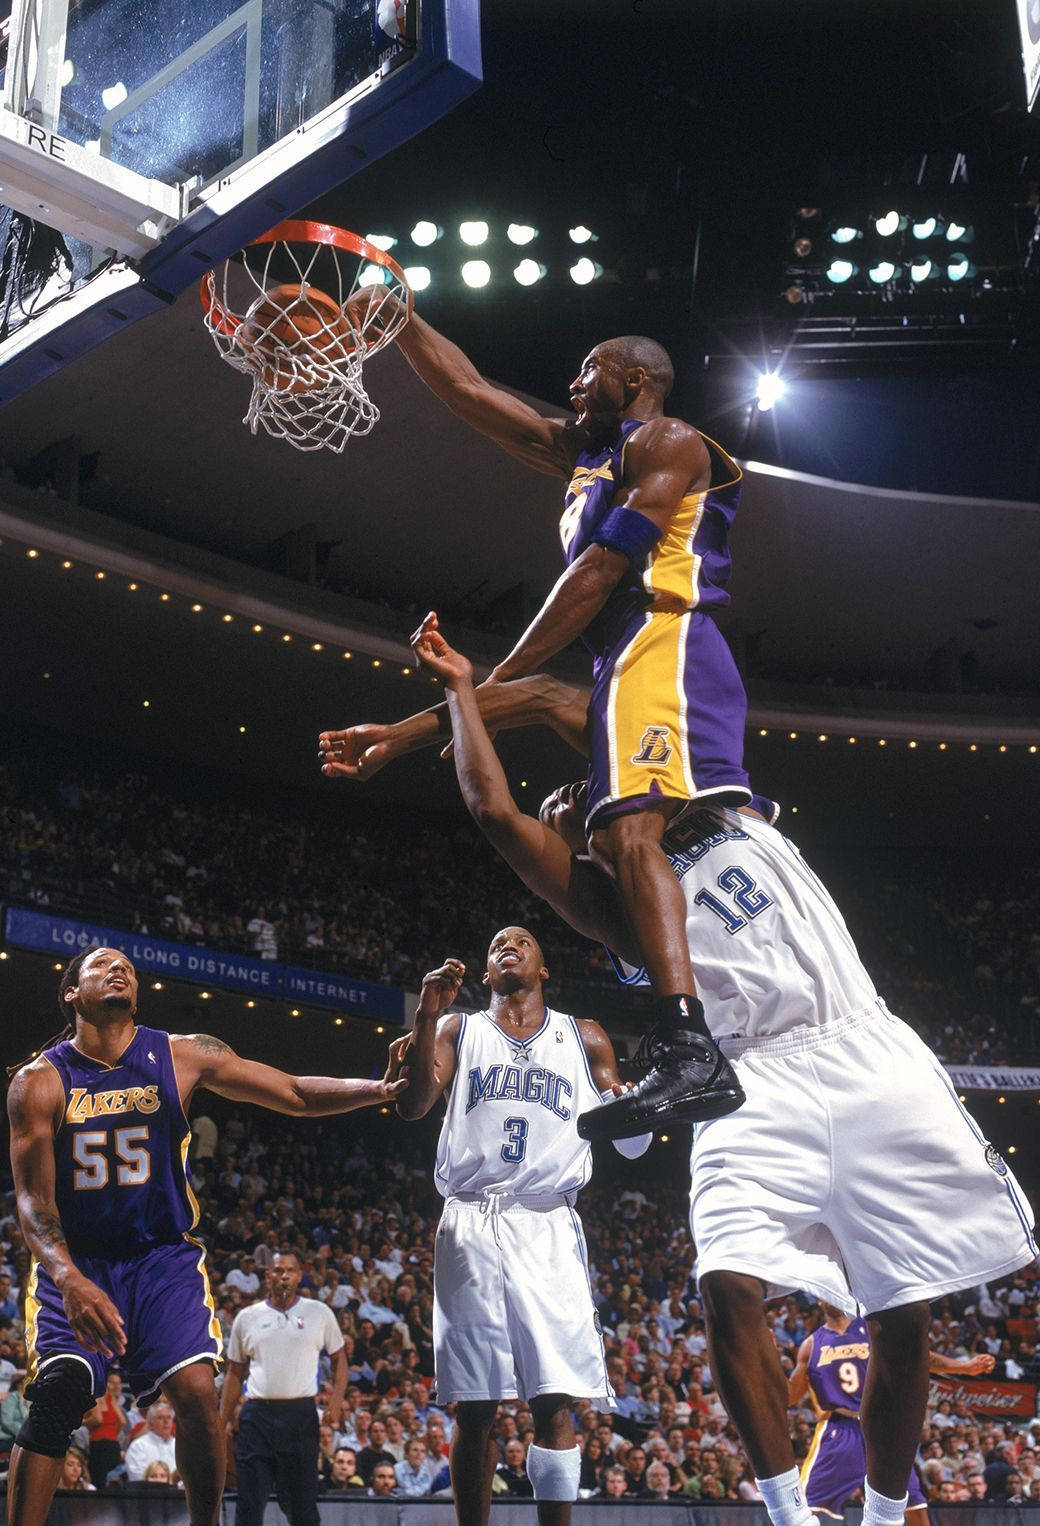 Nbaiphone Kobe Bryant Dunk Över Dwight Howard. (note: This Sentence Is Grammatically Correct, But It May Not Be The Most Idiomatic Way To Phrase It. A More Natural-sounding Sentence Might Be 